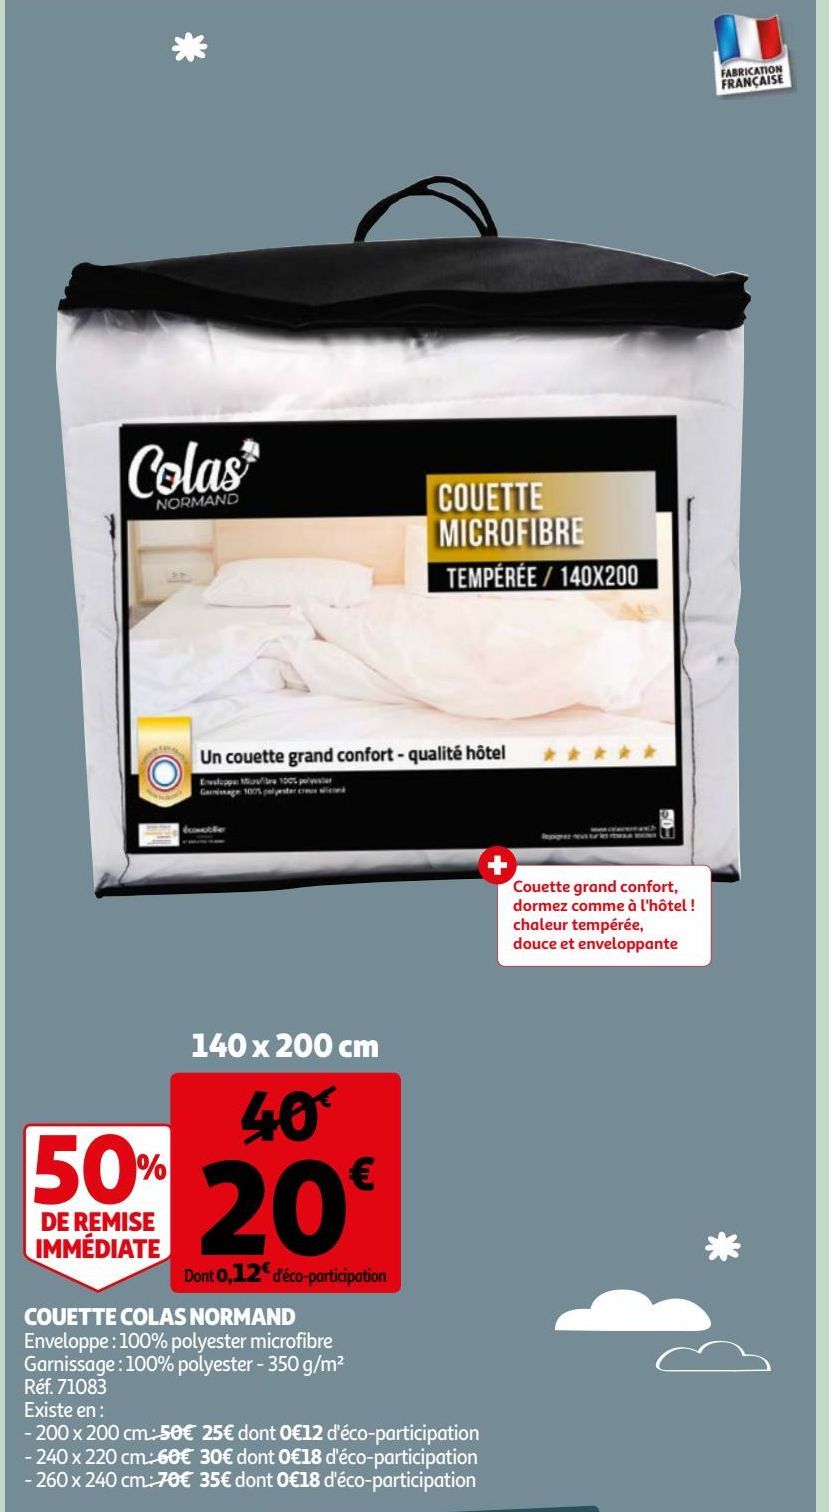 COUETTE COLAS NORMAND